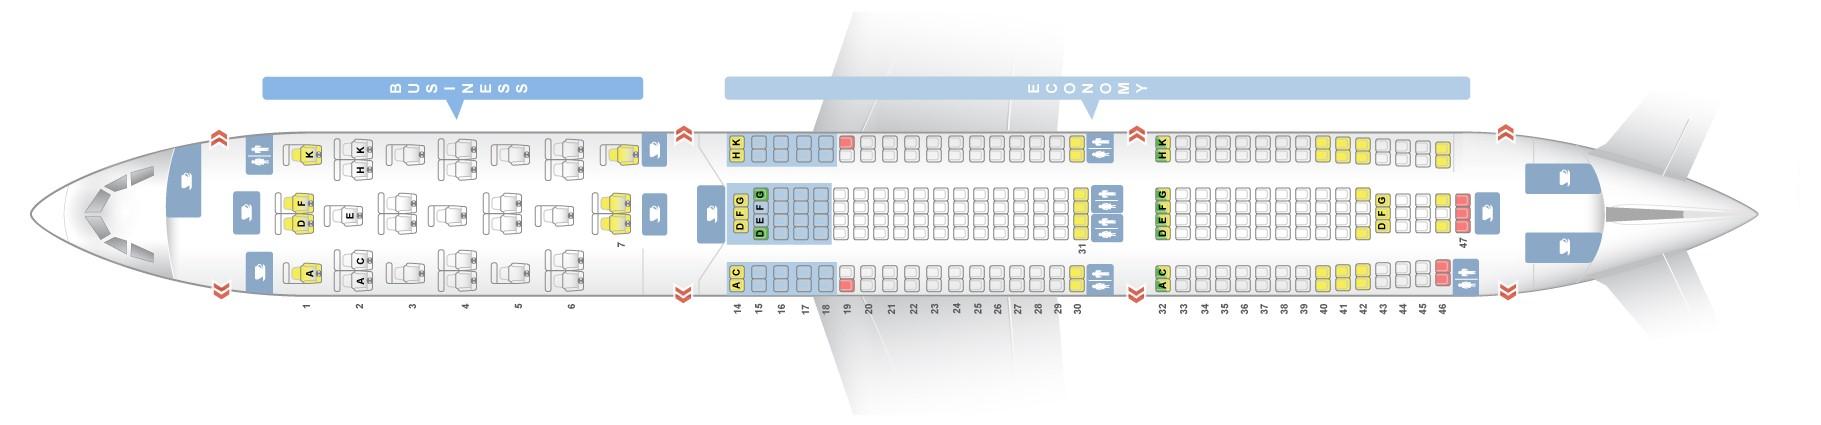 Airbus Industrie A330 300 Seating Chart